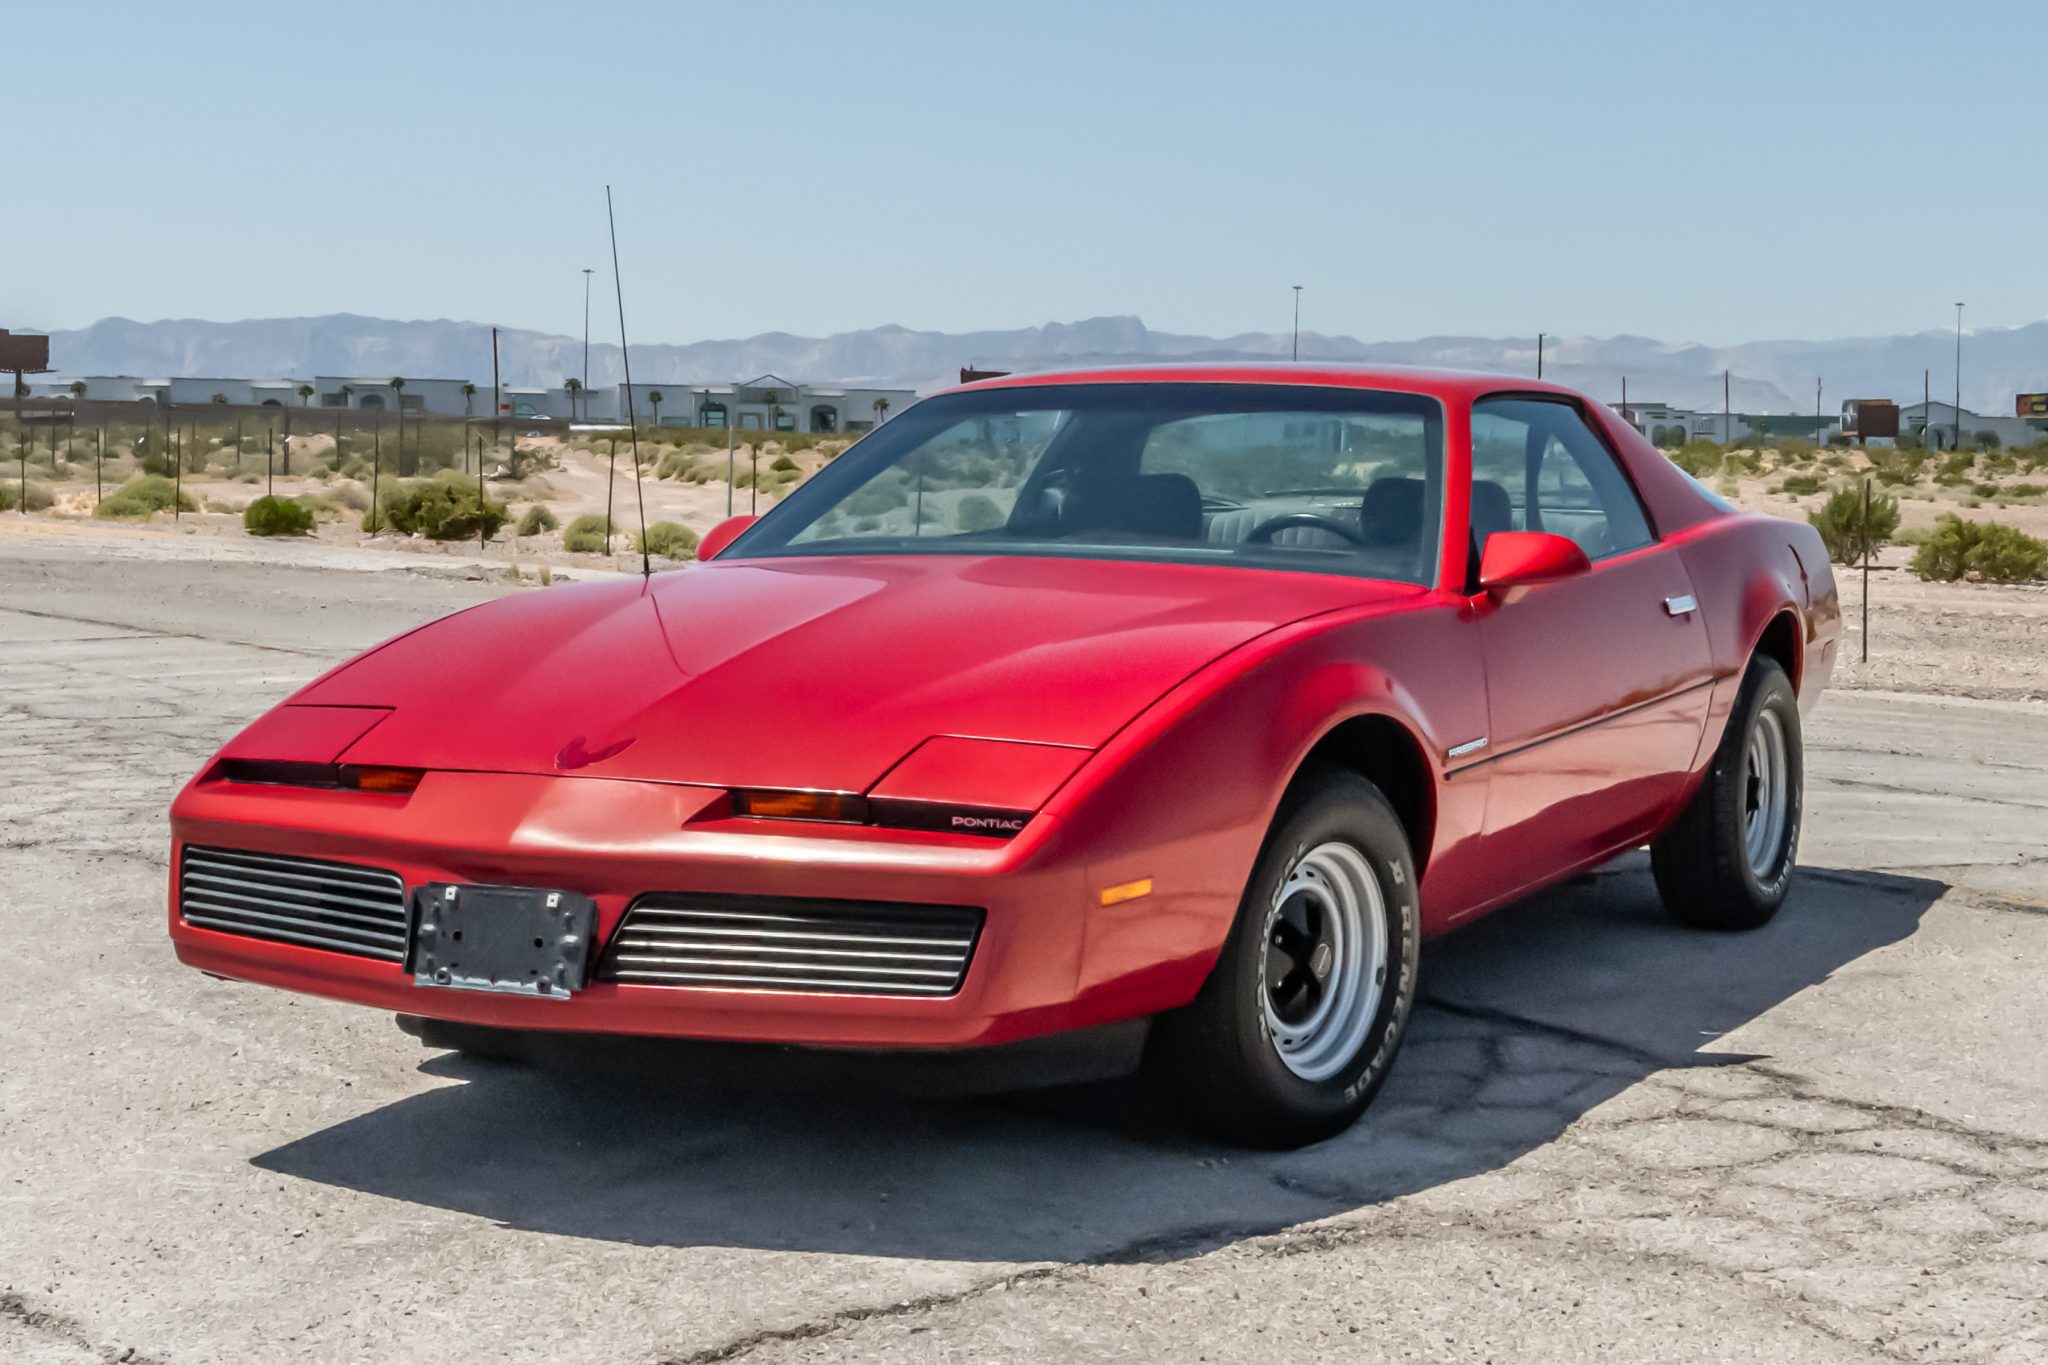 Used 11k-Mile 1984 Pontiac Firebird Coupe Review